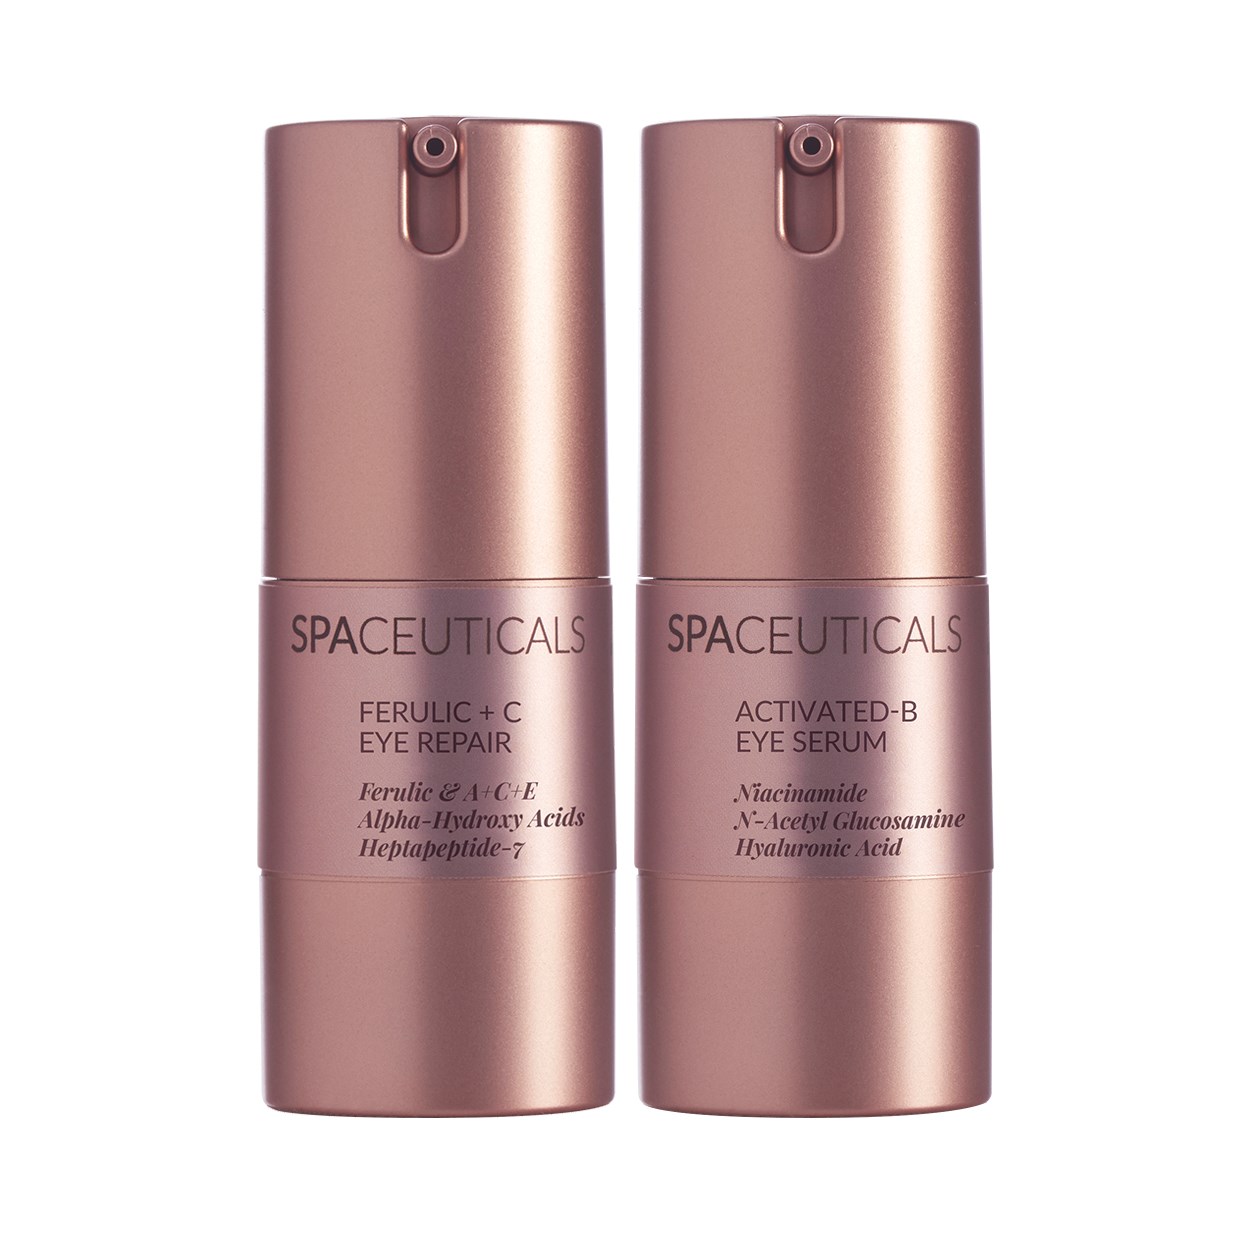 SpaCeuticals Complete Eye Perfection Duo